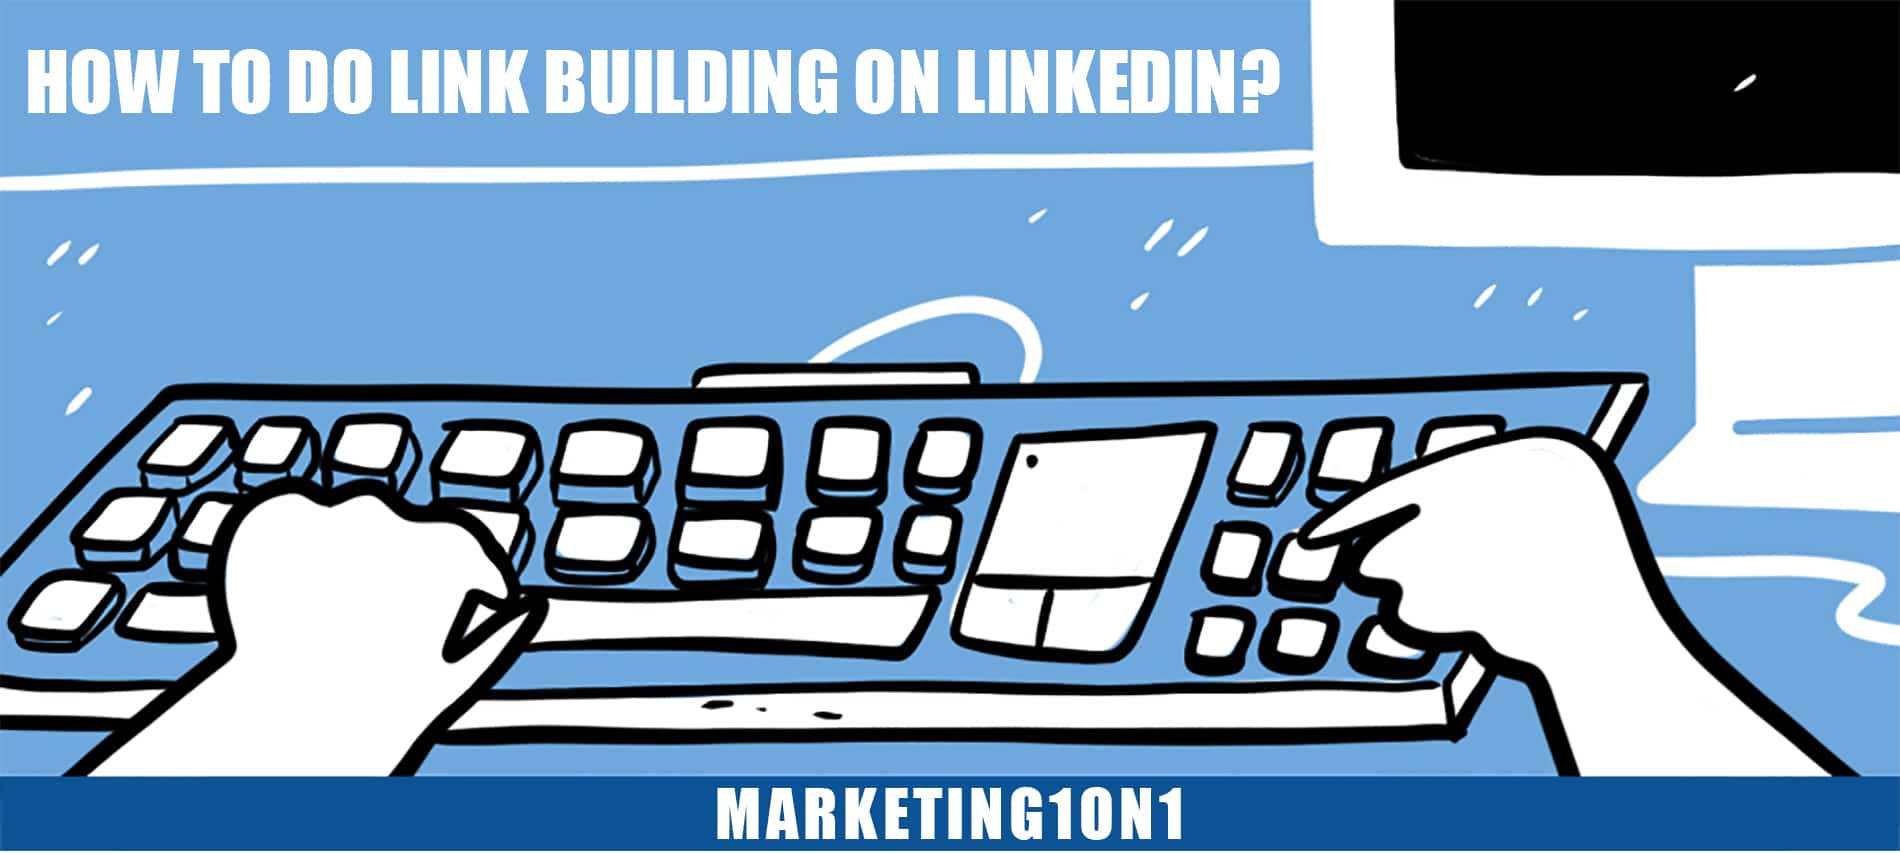 How to do link building on LinkedIn?